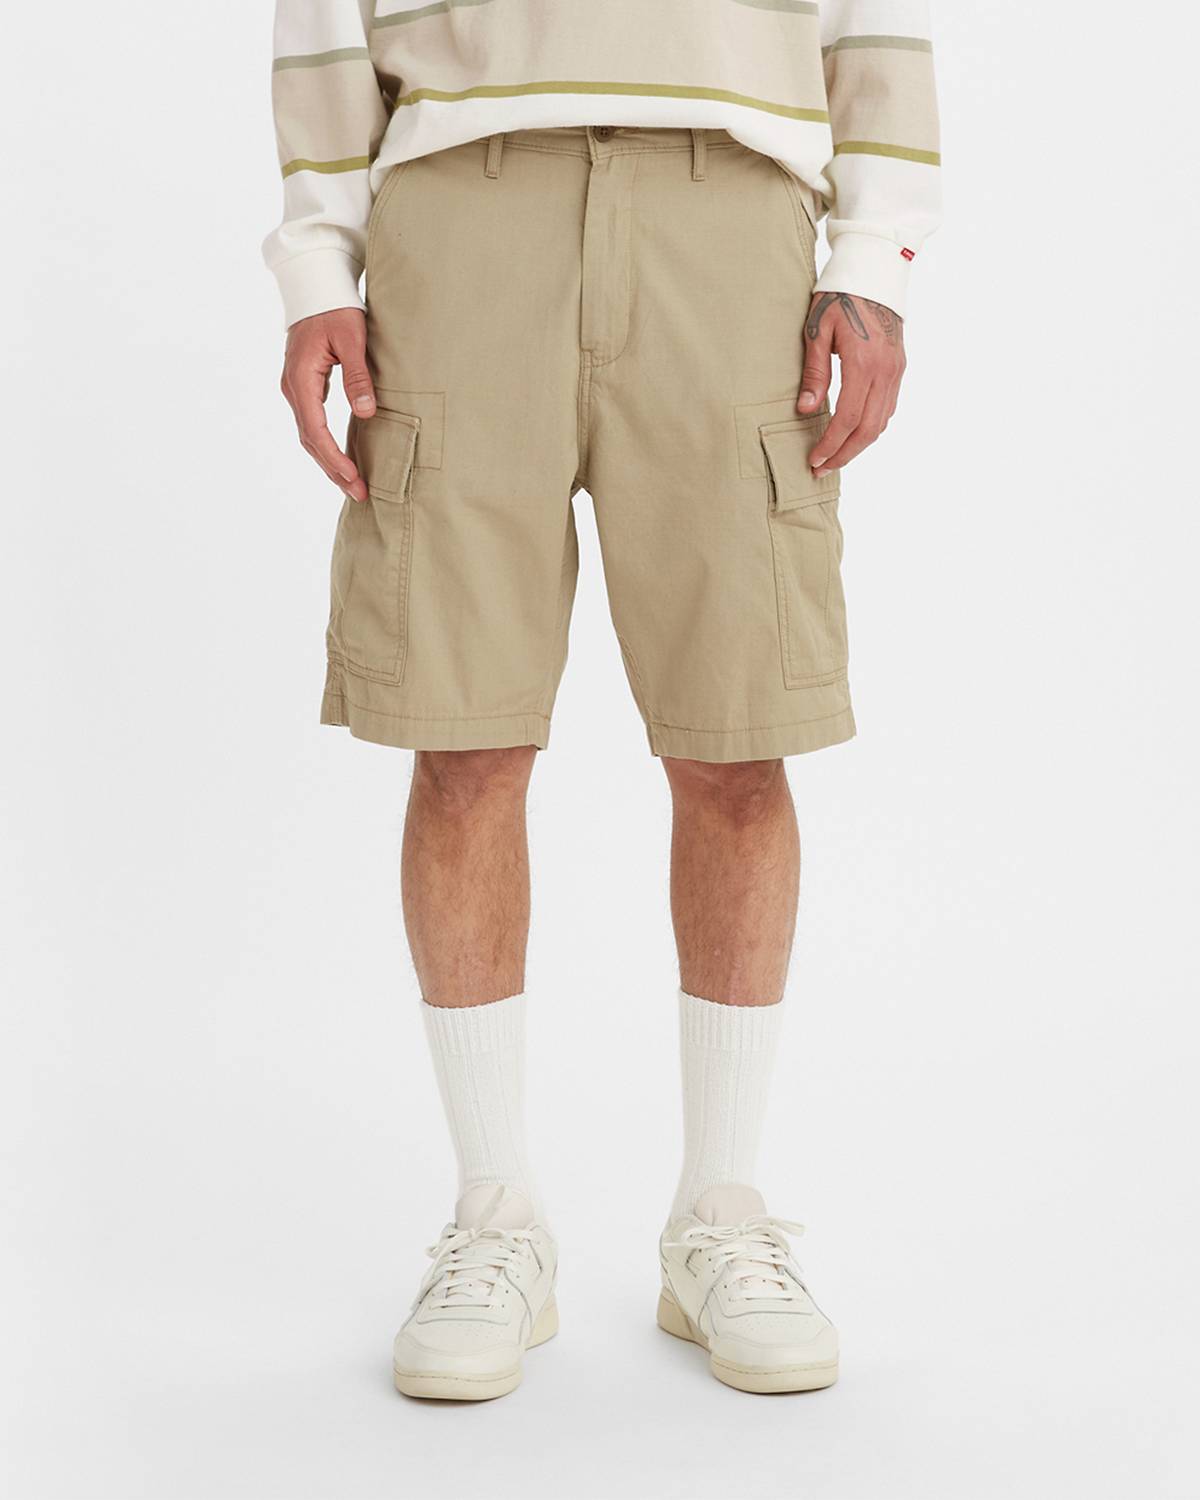 Shorts For Men - Cargo, Jean, Chino & More | Levi\'s® US